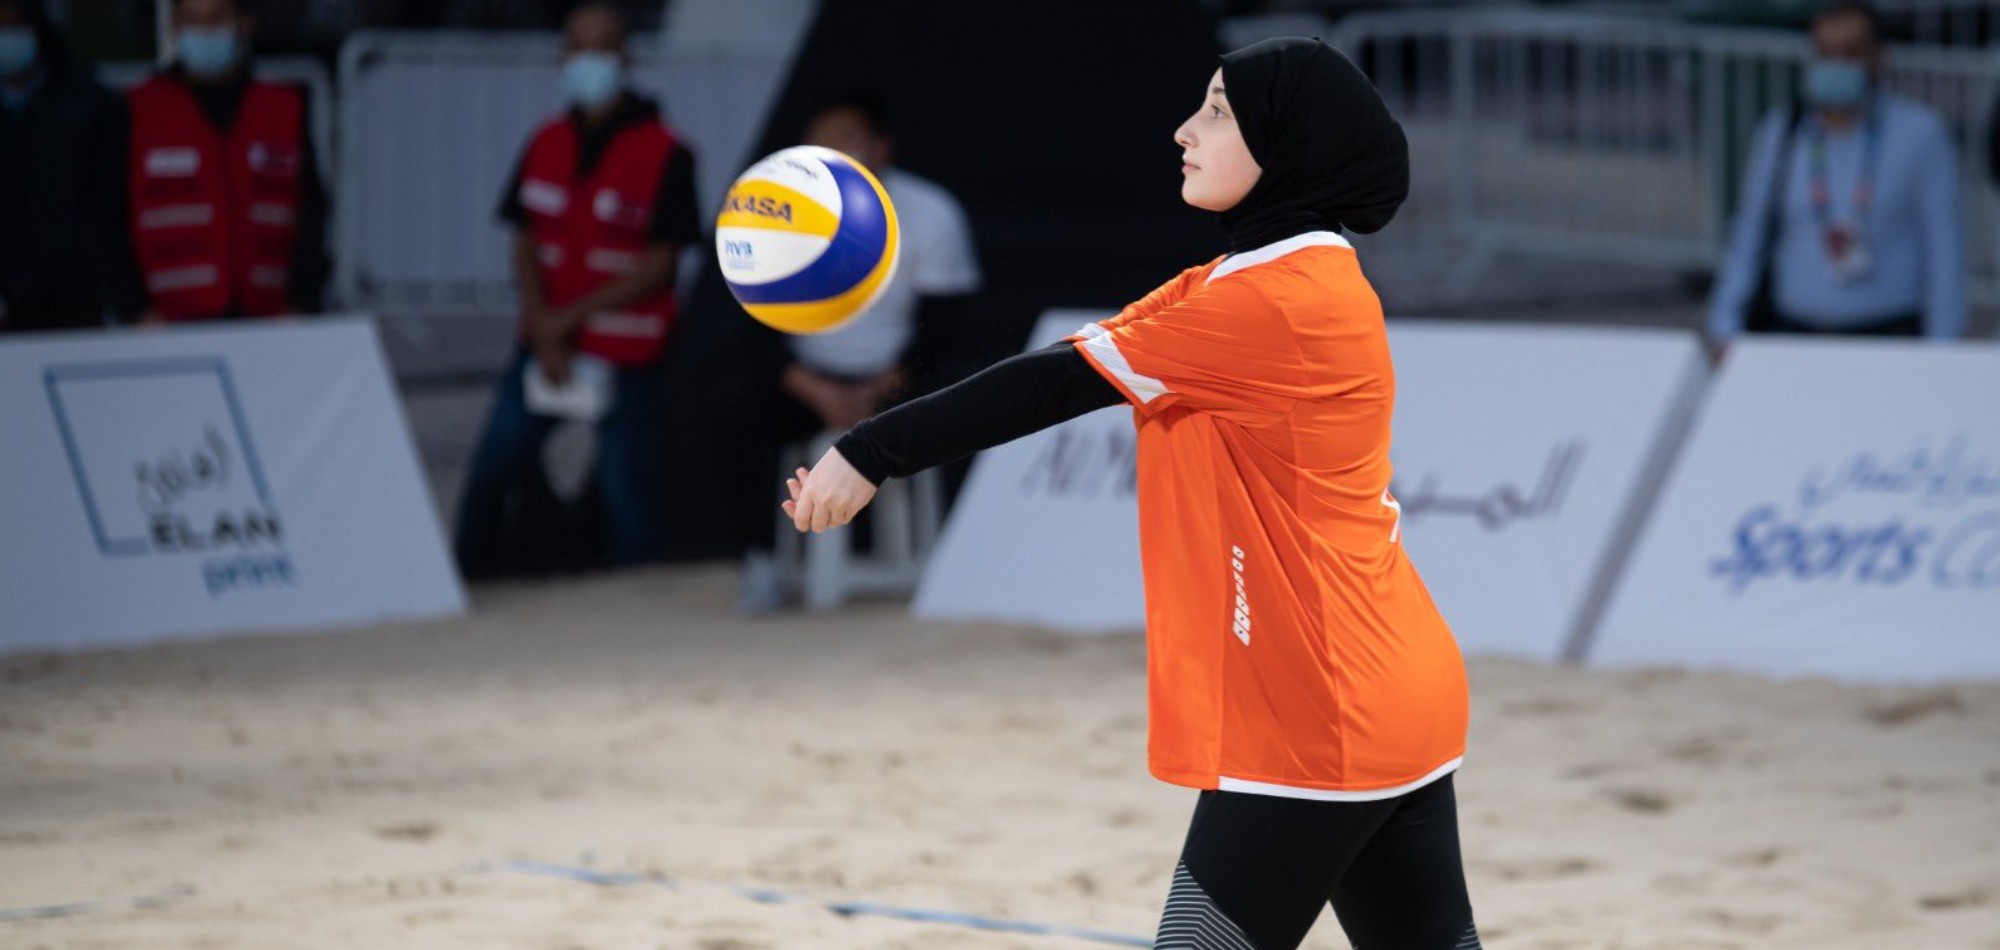 Al Shaqab dominate Msheried Ladies in straight set to reach the quarterfinals of the QOC Beach Games